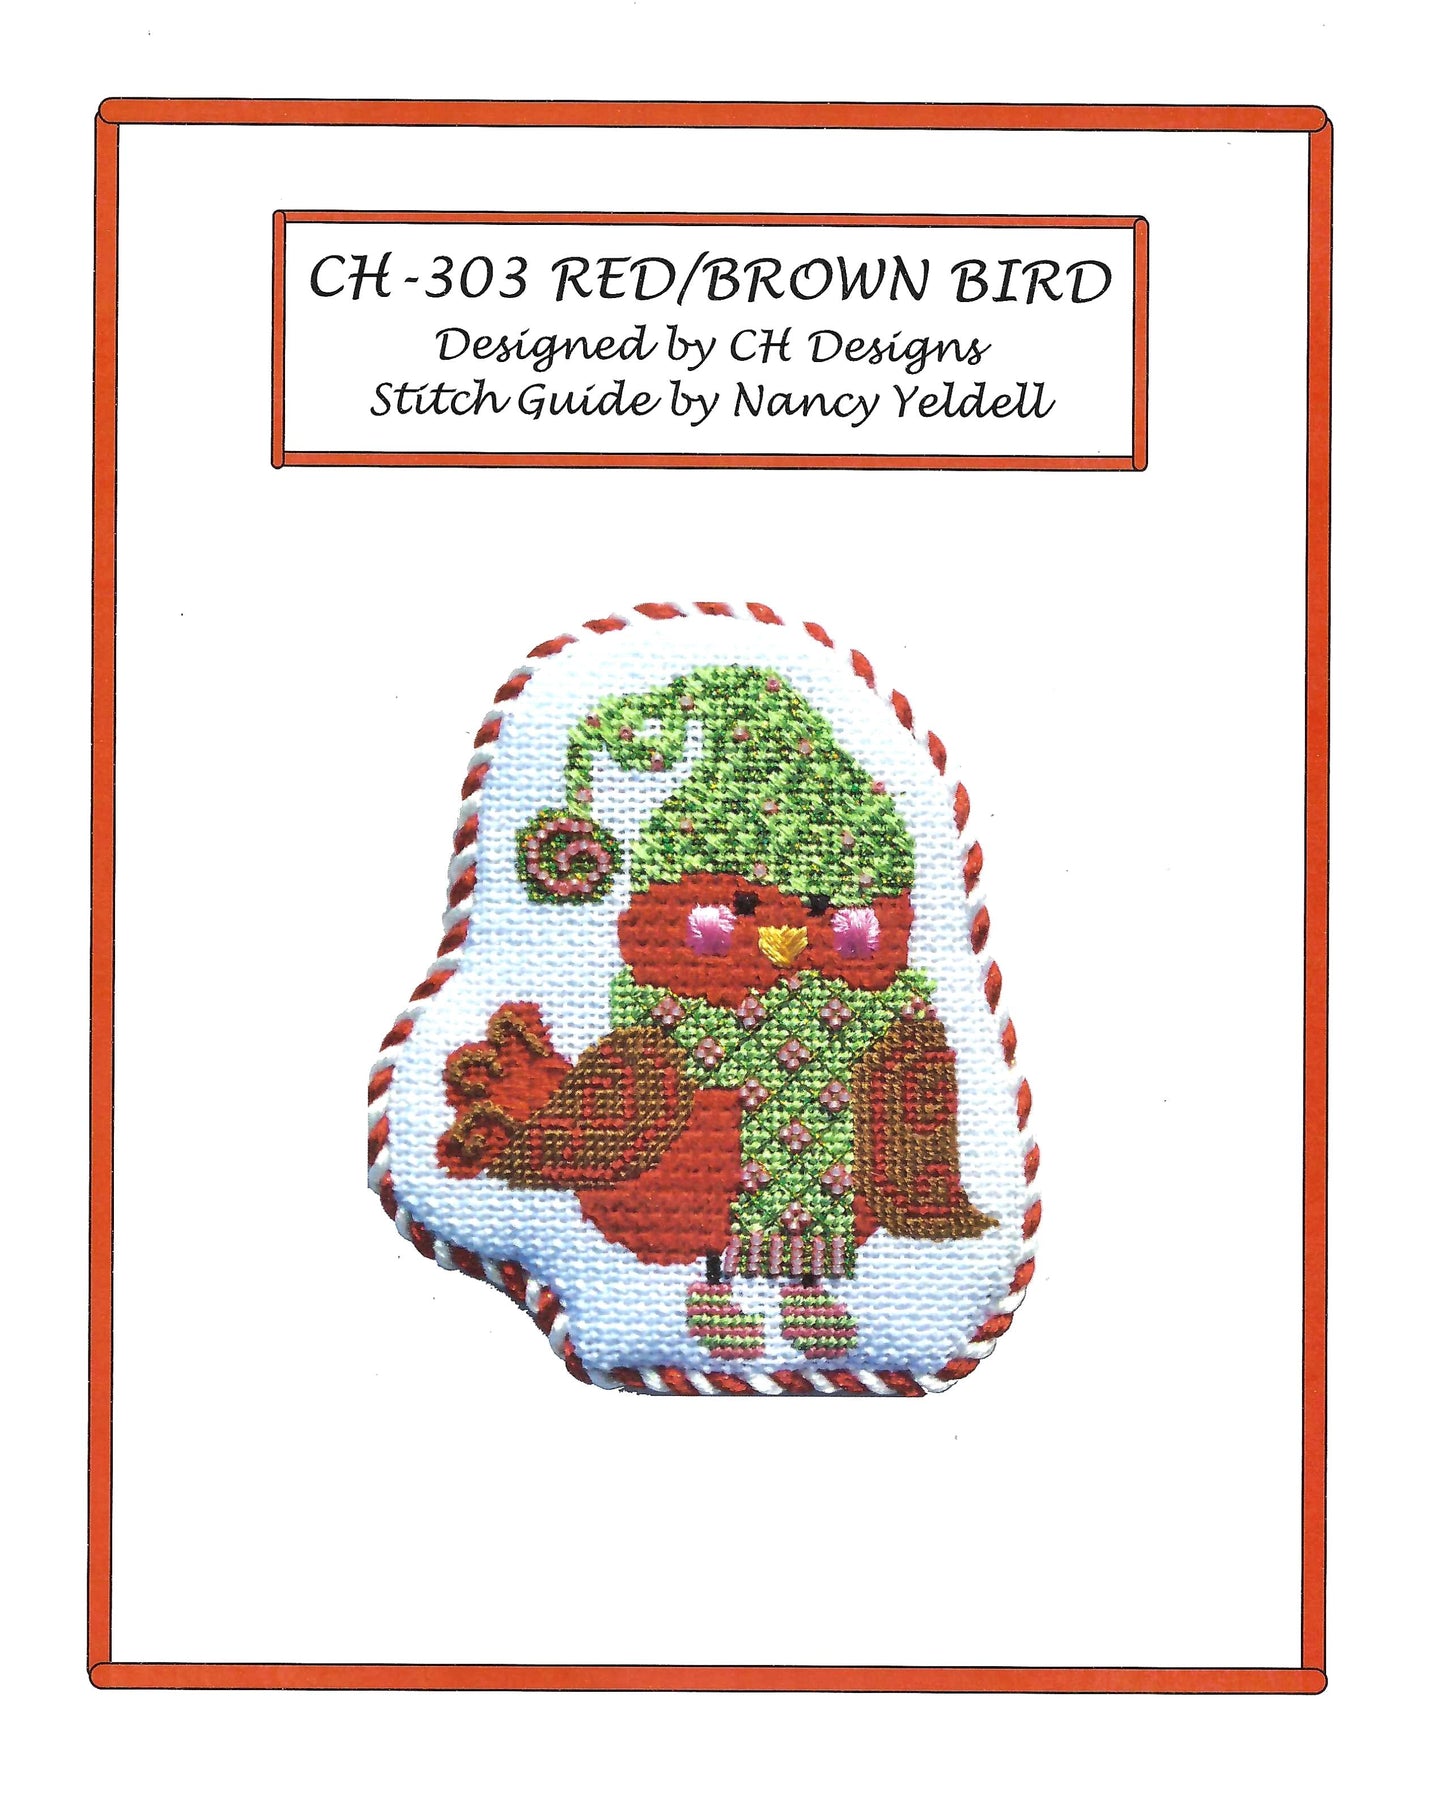 Bird Canvas ~ Red & Brown Bird in Scarf & Hat & STITCH GUIDE handpainted Needlepoint Canvas by CH Designs from Danji